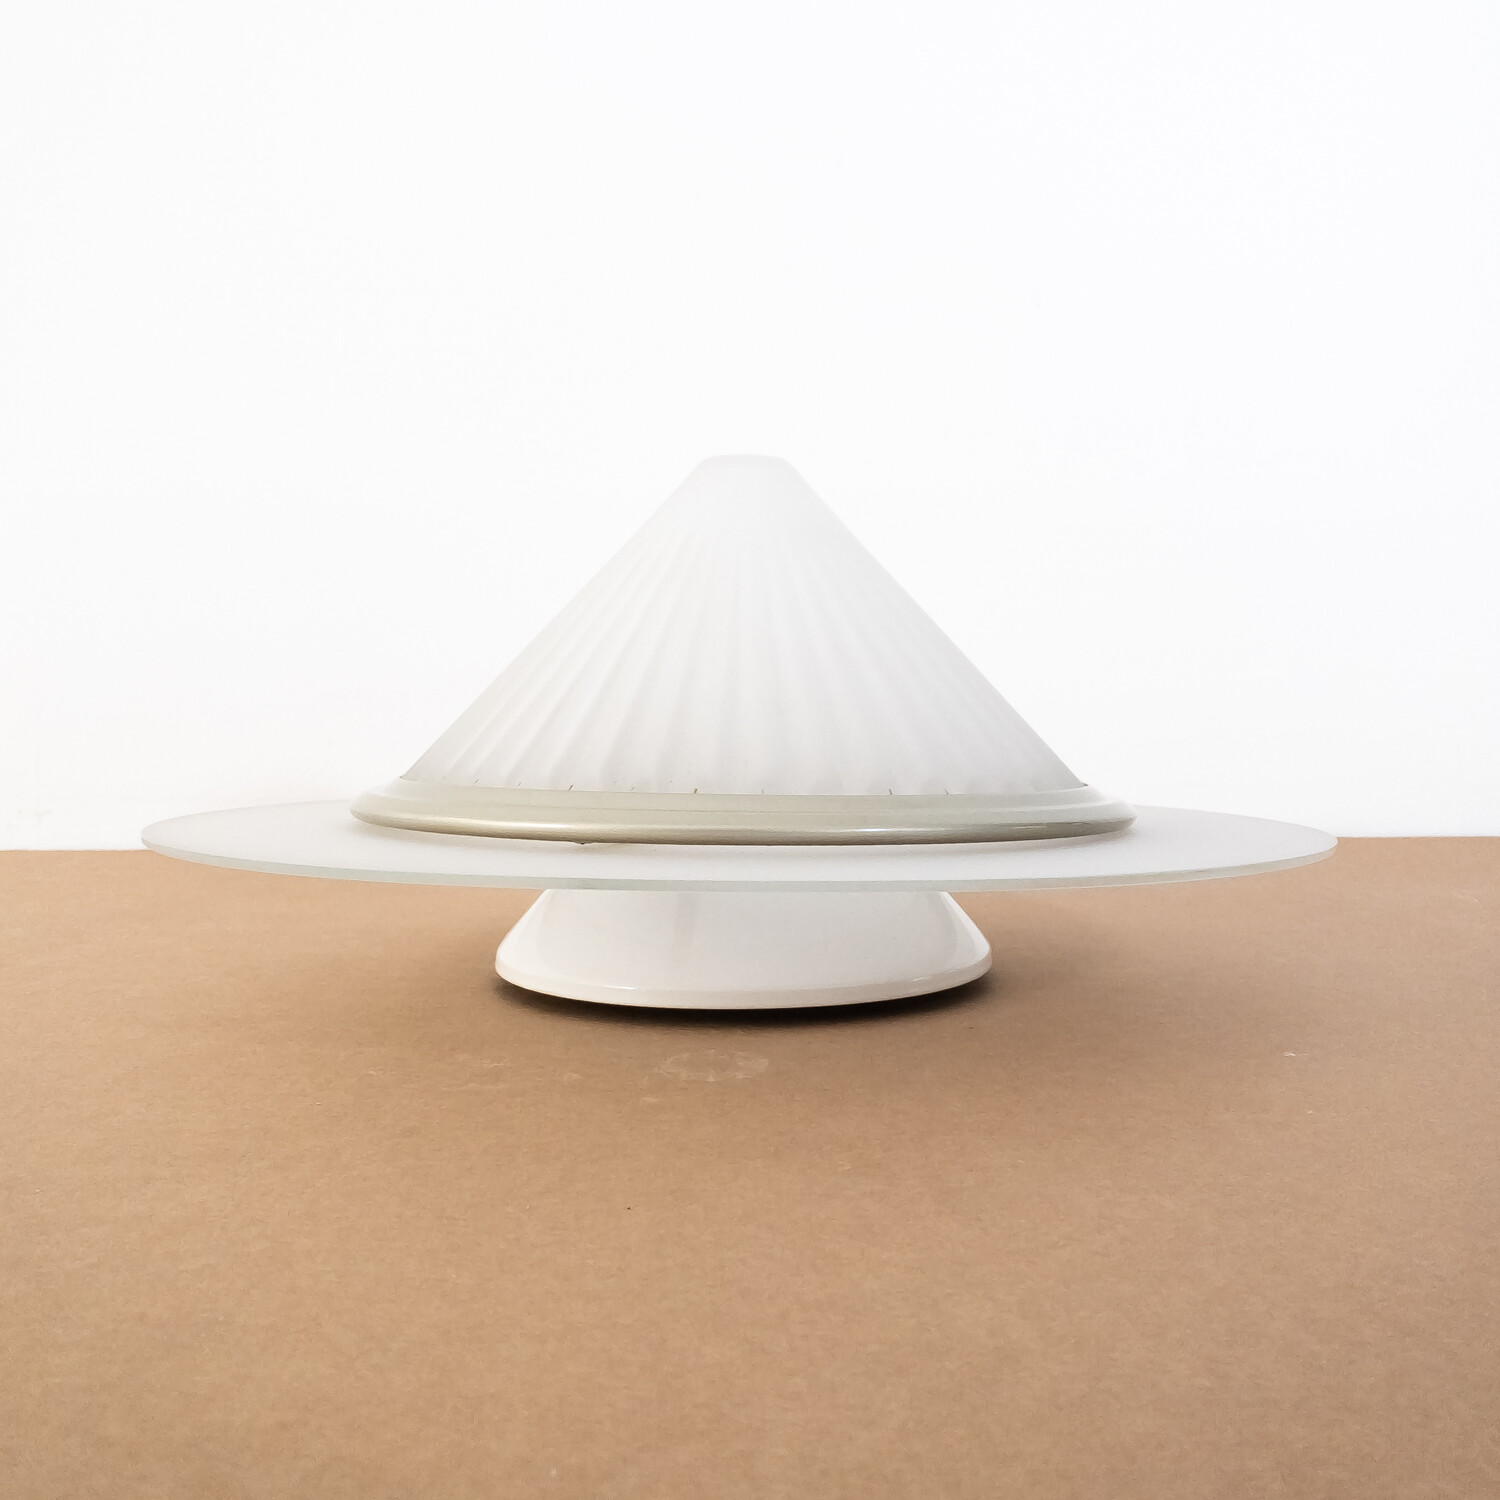 Atena ceiling lamp by Ezio Didone for Arteluce, 1980s Italy